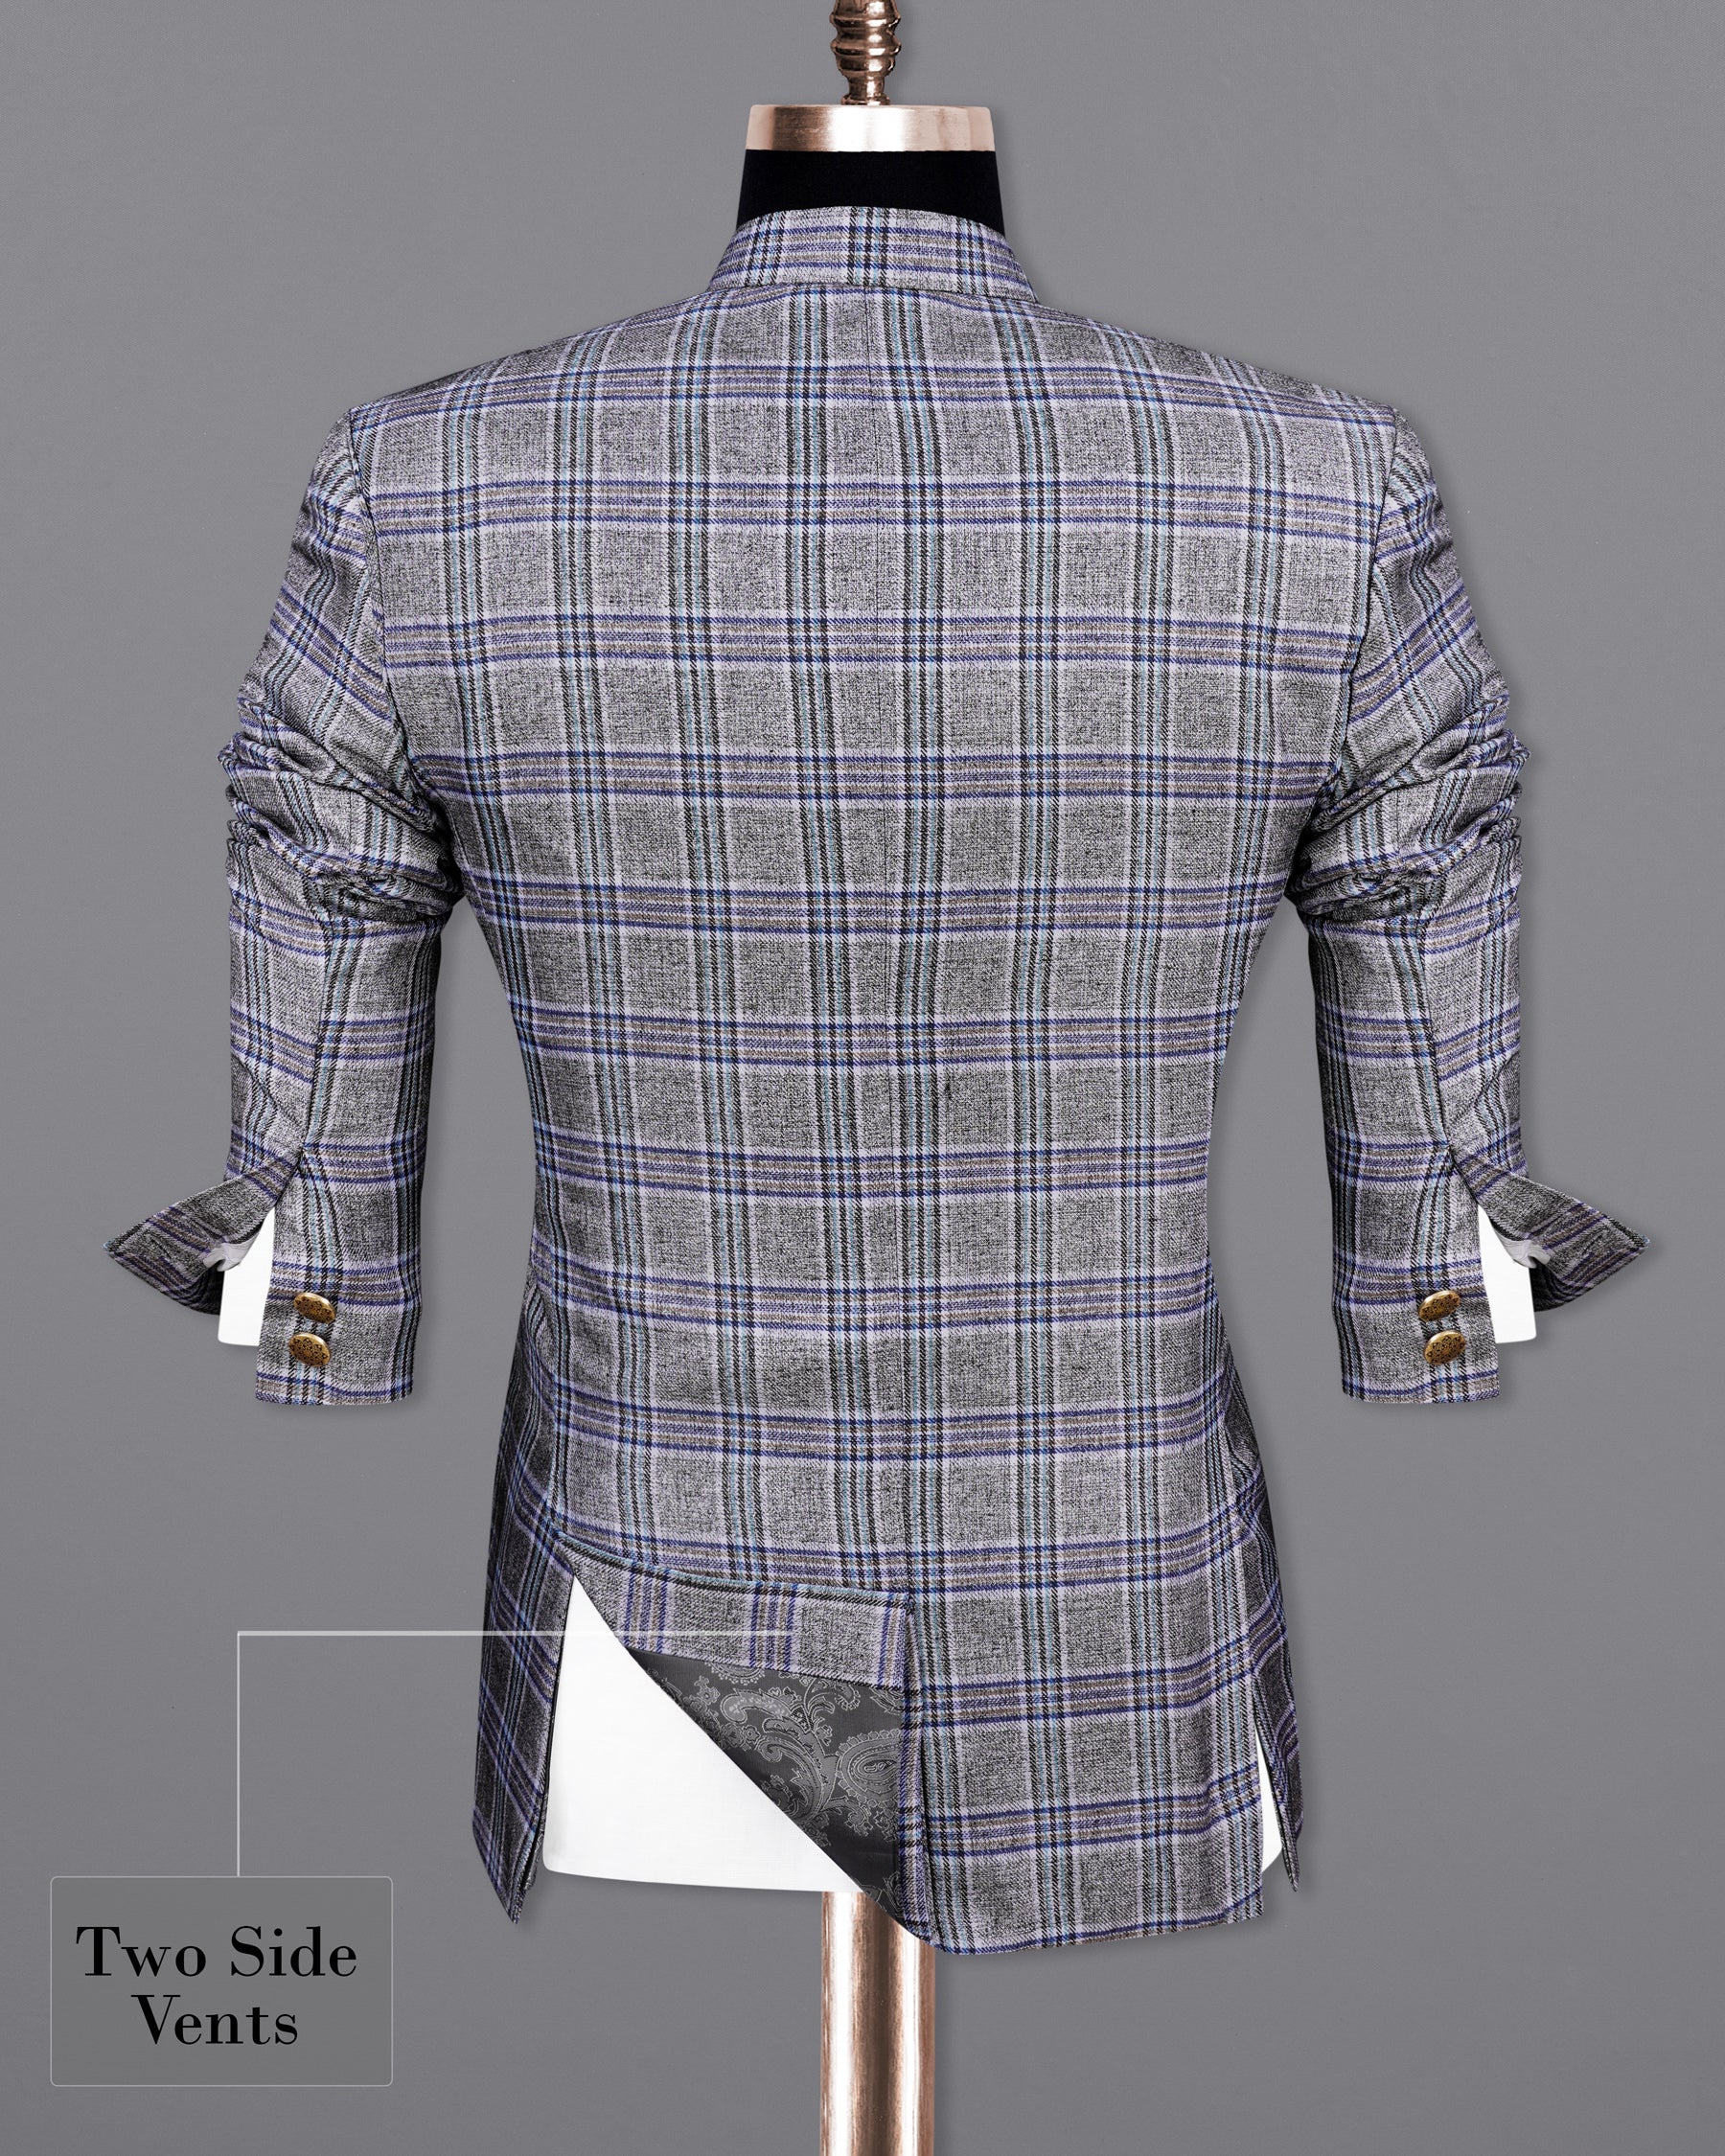 StarDust Gray with Martinique Blue Plaid Bandhgala Blazer BL2145-BG-36, BL2145-BG-38, BL2145-BG-40, BL2145-BG-42, BL2145-BG-44, BL2145-BG-46, BL2145-BG-48, BL2145-BG-50, BL2145-BG-52, BL2145-BG-54, BL2145-BG-56, BL2145-BG-58, BL2145-BG-60